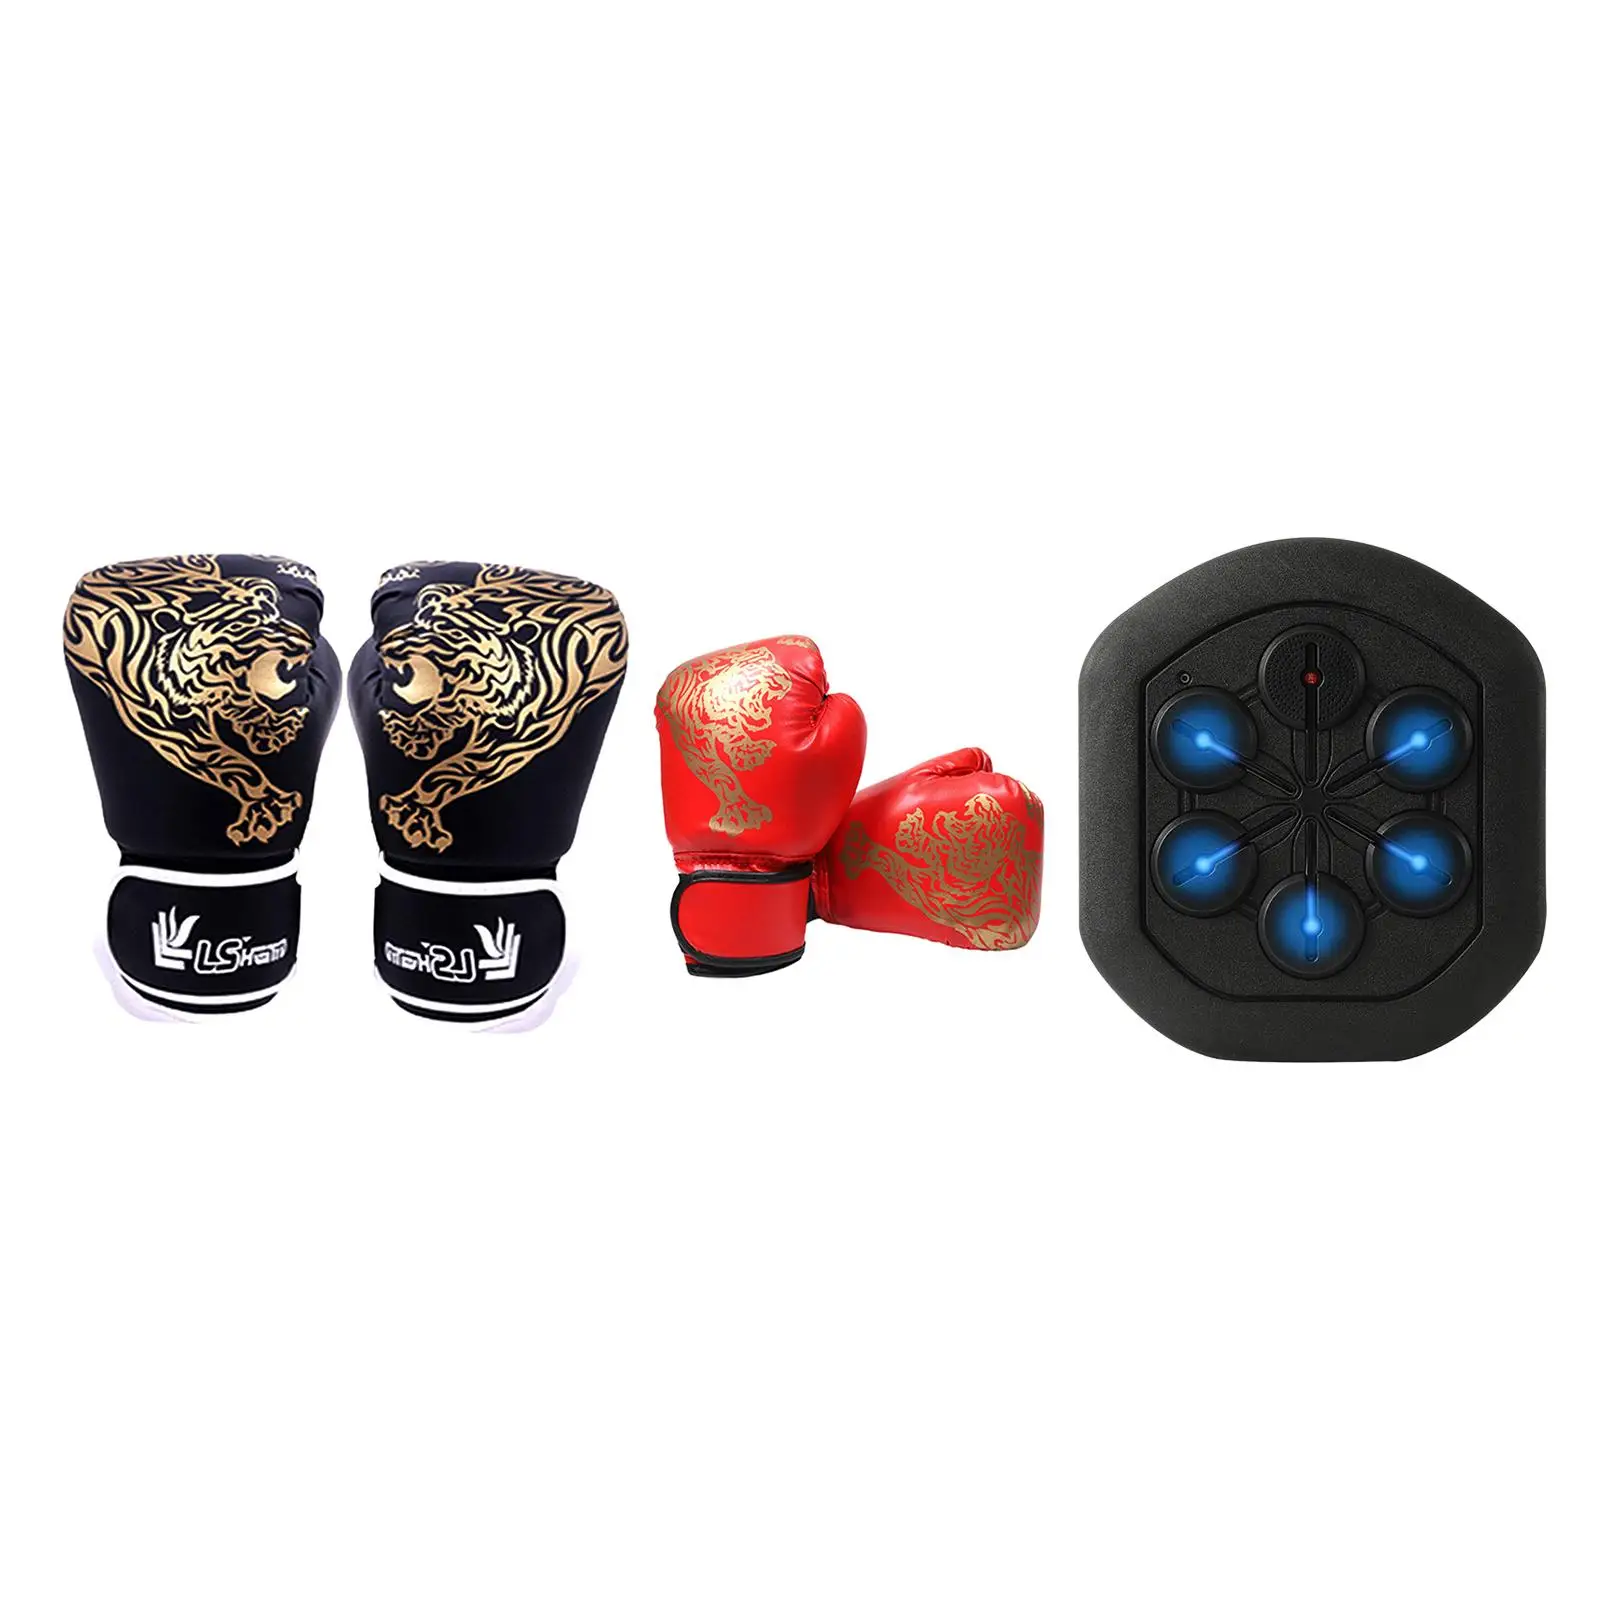 Music Boxing Wall Target for Kids Adults Wall Mounted Boxing Practice Reaction Target Training Equipment Machine Household